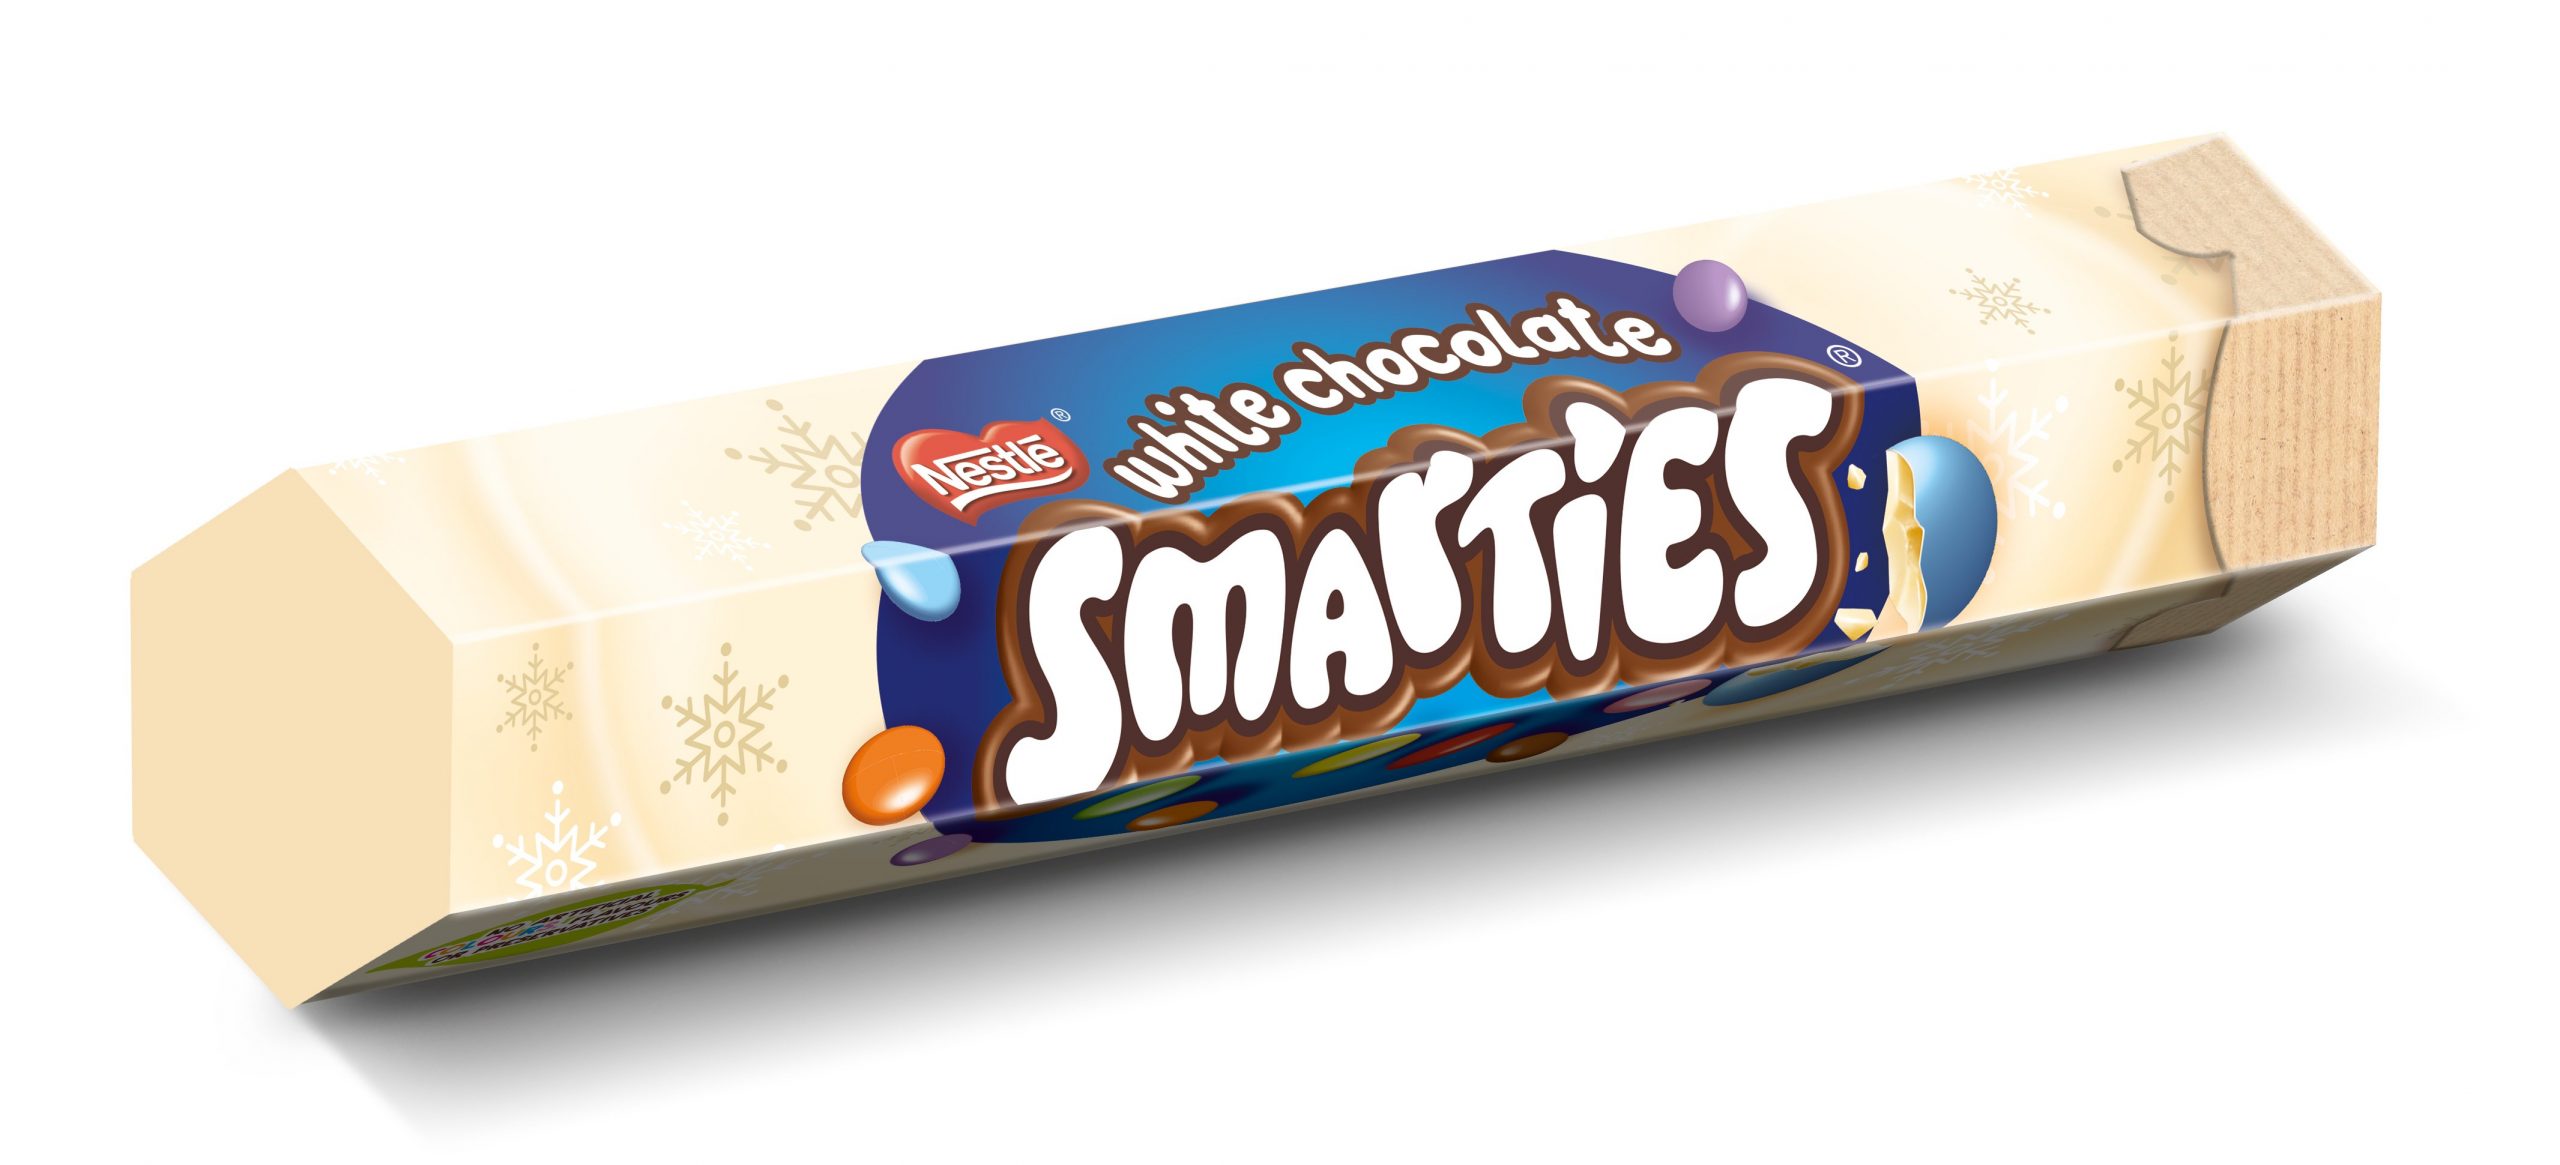 Nestlé Confectionery brings Christmas cheer with news from big brands